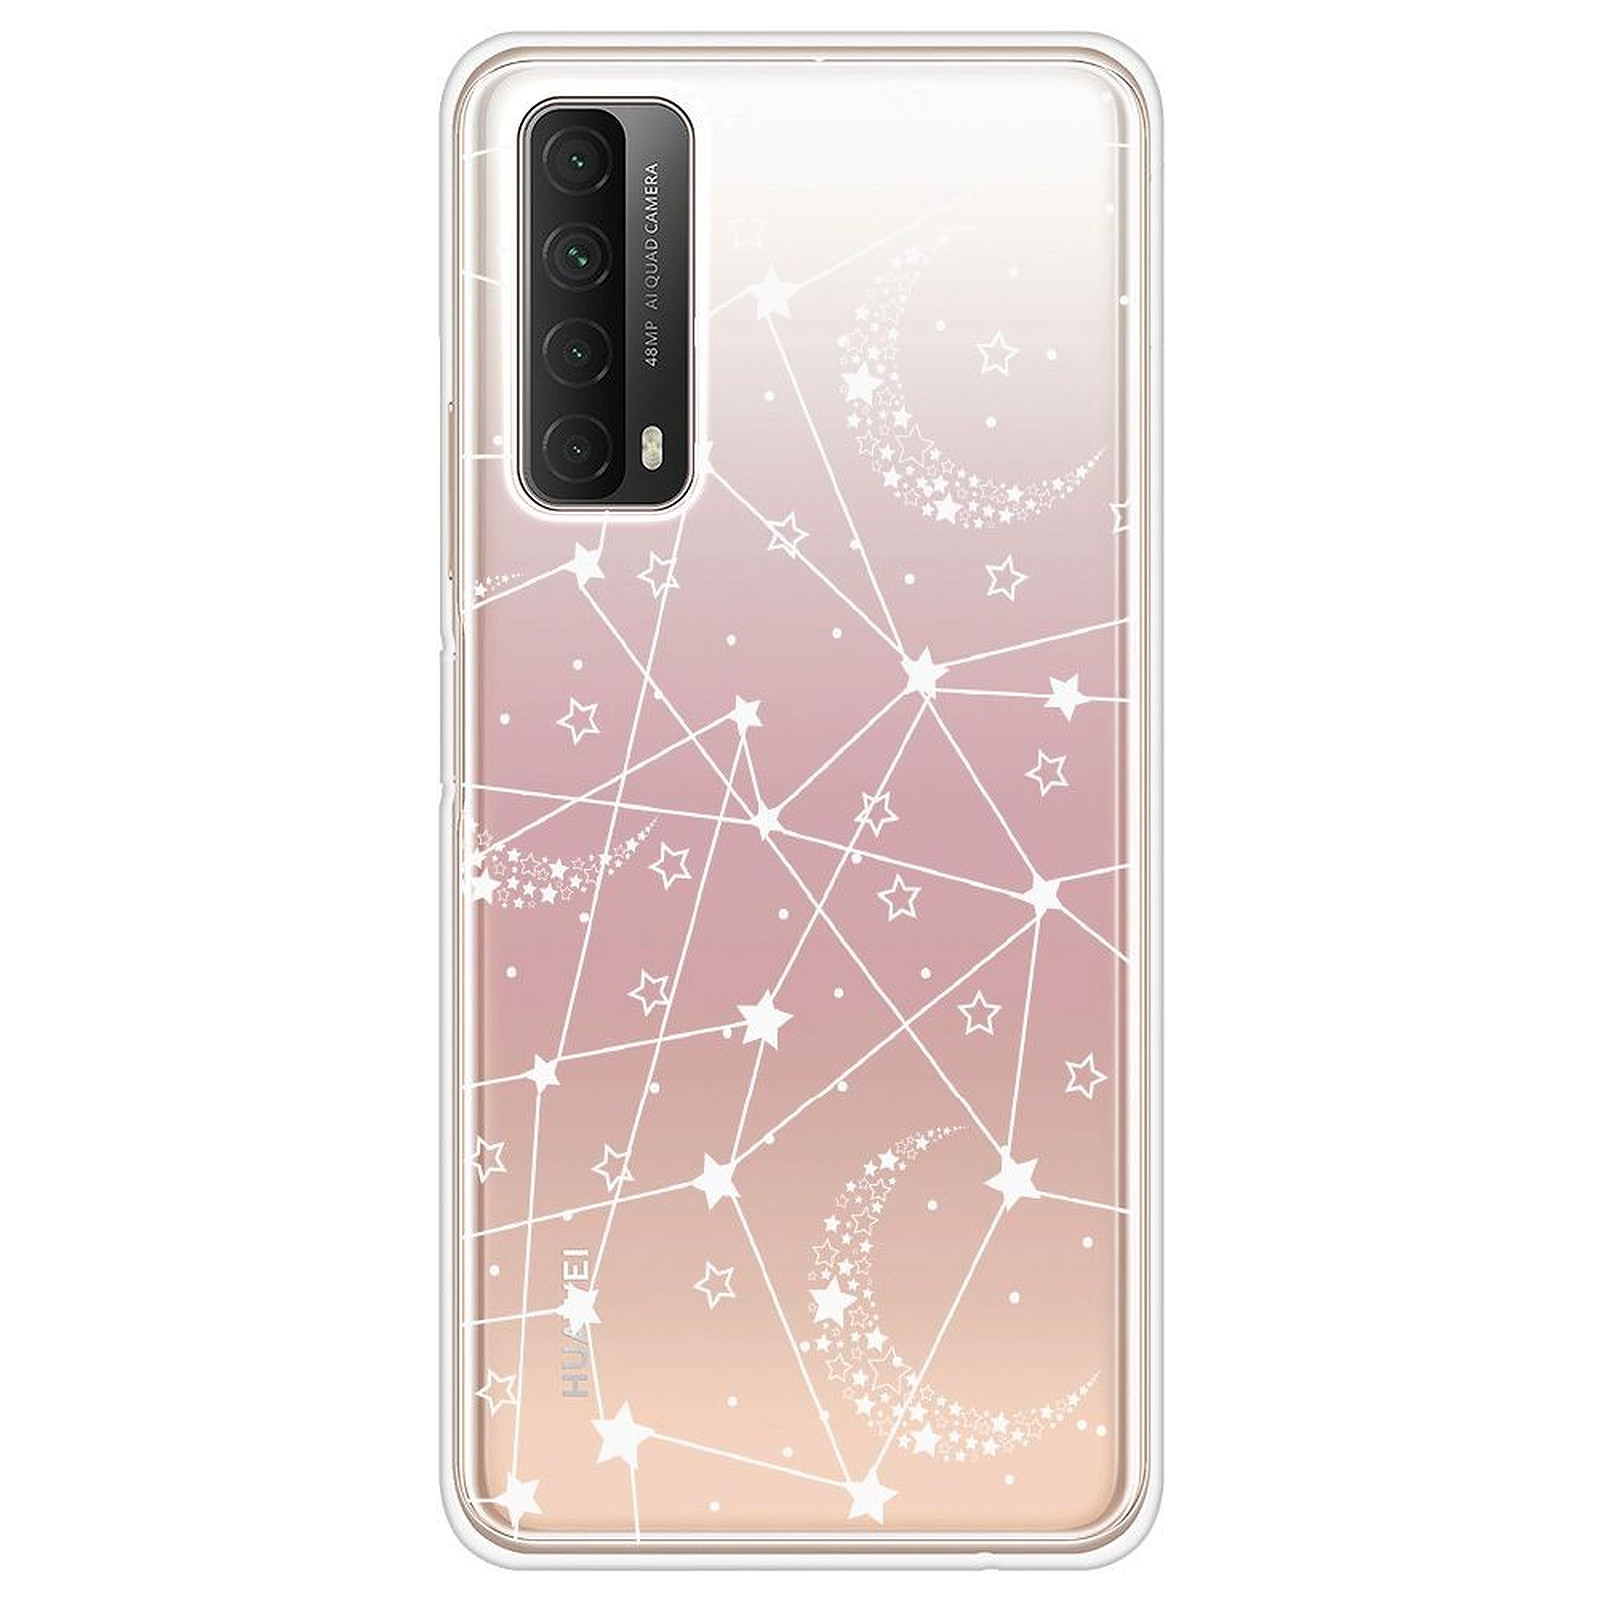 1001 Coques Coque silicone gel Huawei P Smart 2021 motif Lignes etoilees - Coque telephone 1001Coques